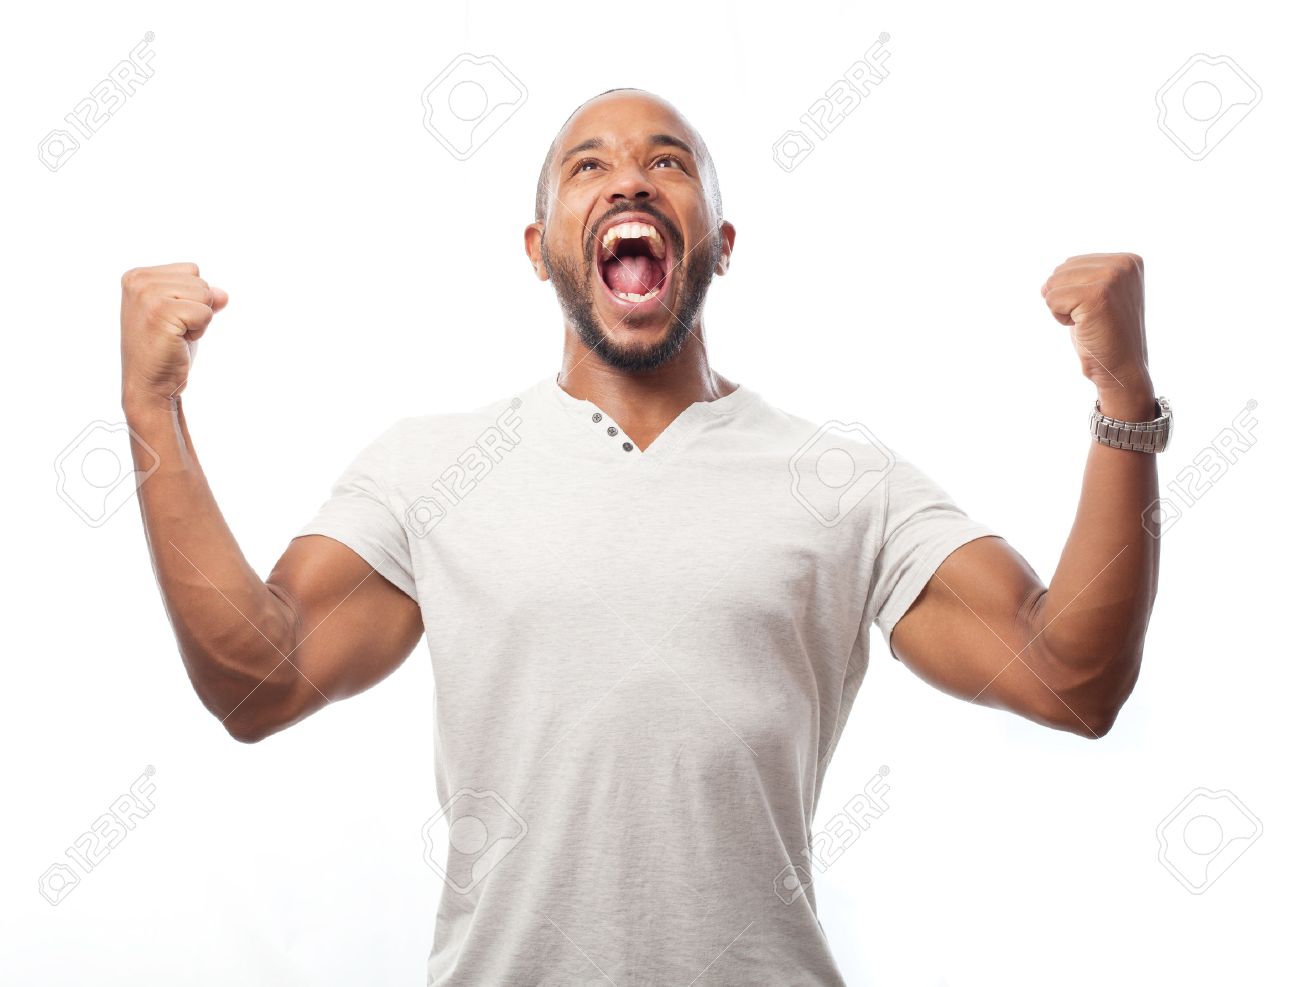 35048058-young-cool-black-man-celebrating-sign-Stock-Photo-excited-man-african.jpg